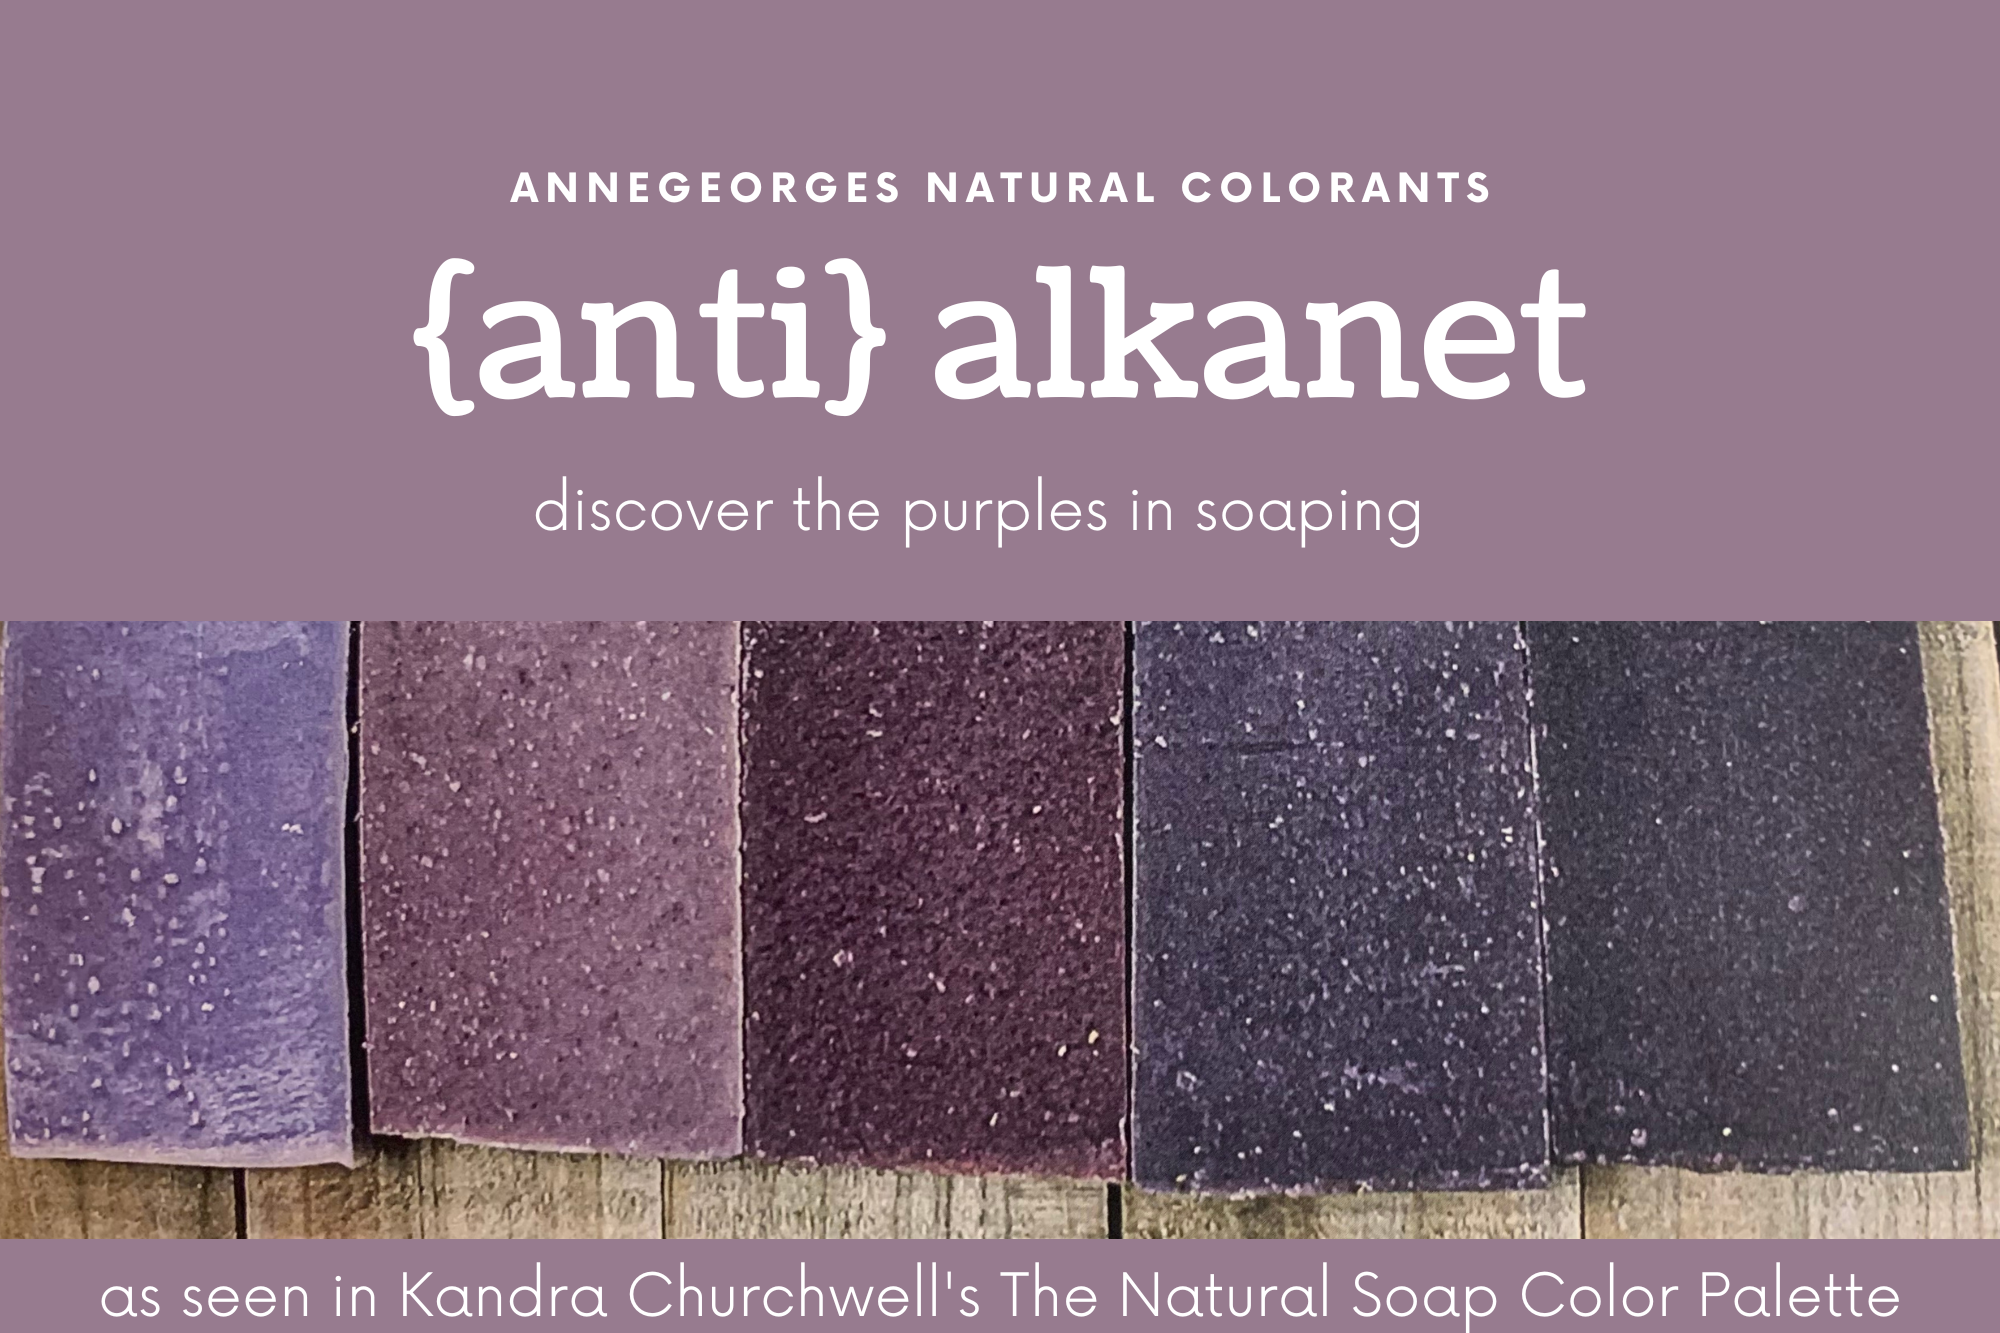 Anti-Alkanet The Purples is a set of natural colorants that make Purples in  soaping. As seen in Kandra Churchwell's The Natural Soap Color Palette.